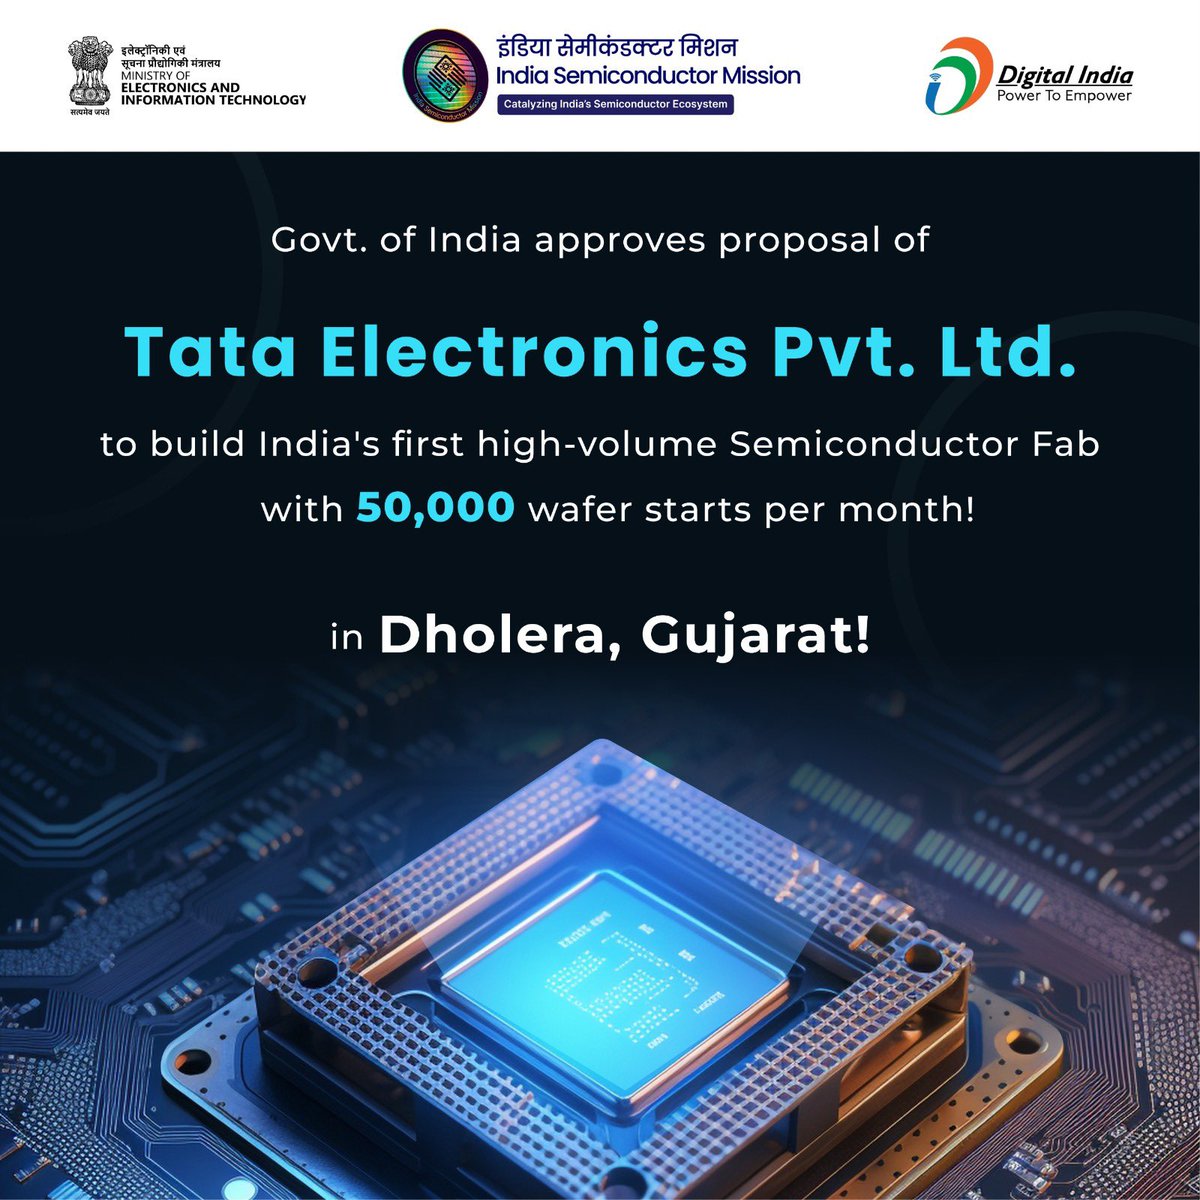 Giant leap in India’s Semiconductor Journey! Reinforcing Hon’ble PM @narendramodi's vision, GoI approves 3 projects for semiconductor fab & OSAT facilities under ₹76k Cr. #SemiconIndiaProgramme, generating 20,000+ direct jobs. @AshwiniVaishnaw @Rajeev_GoI @GoI_MeitY